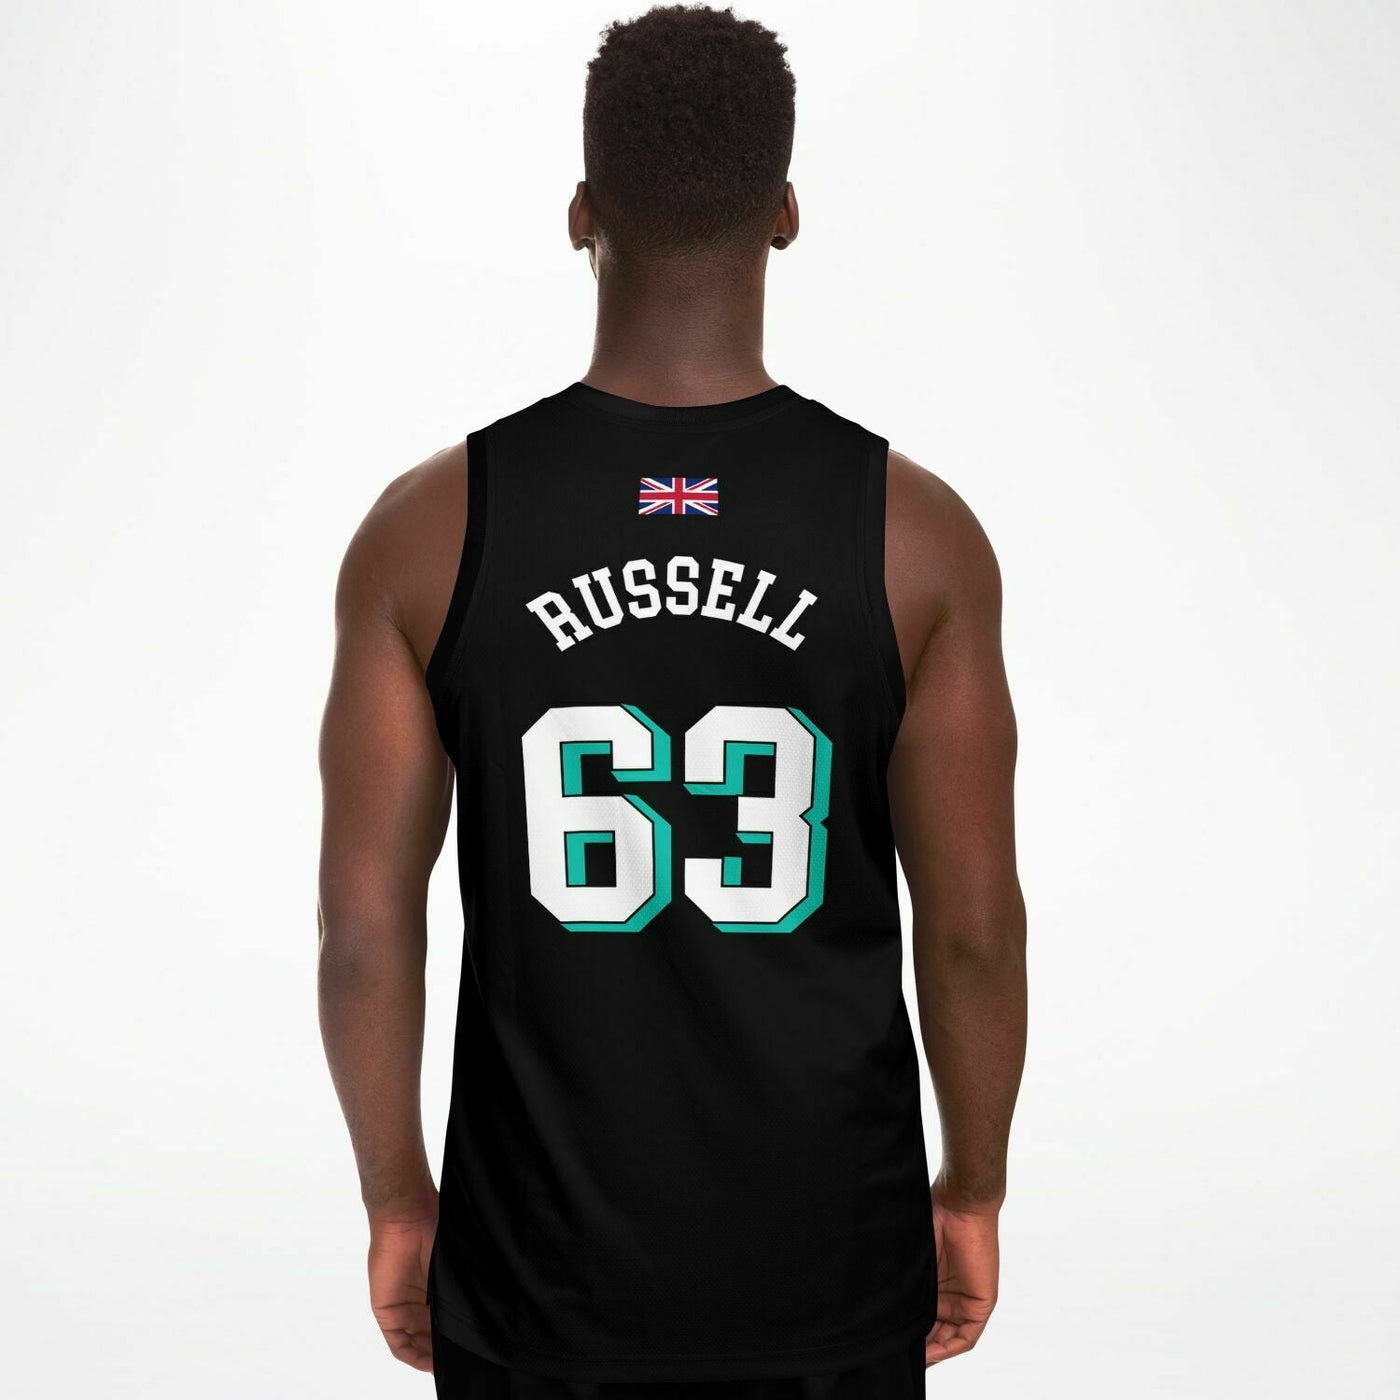 Russell - Away Black Classic Edition Jersey - Furious Motorsport